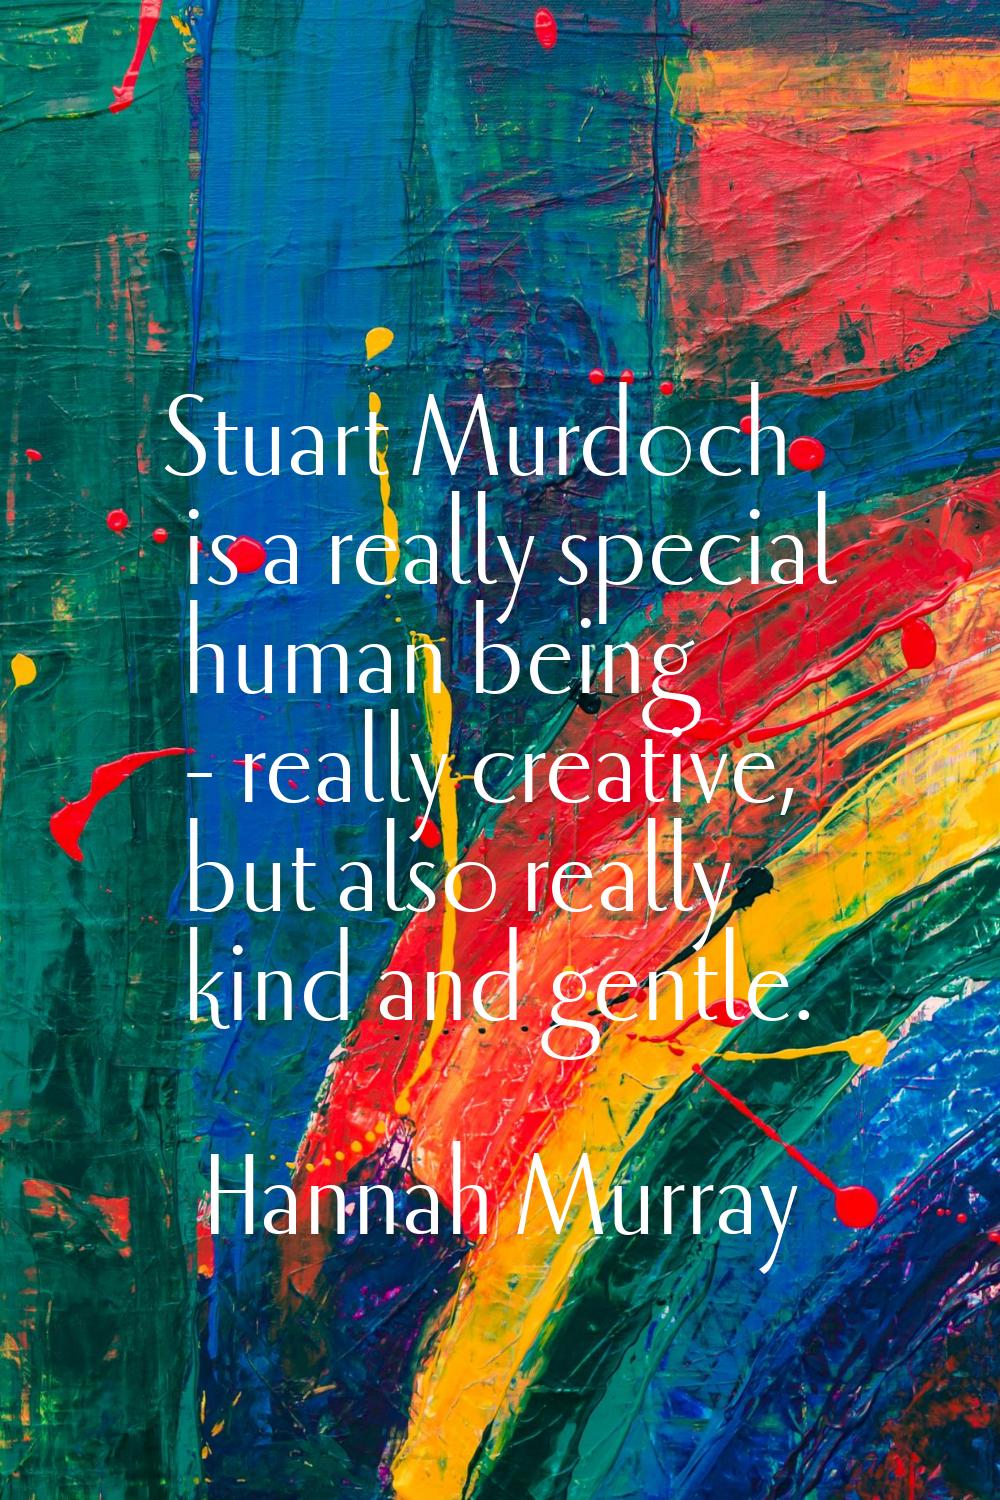 Stuart Murdoch is a really special human being - really creative, but also really kind and gentle.